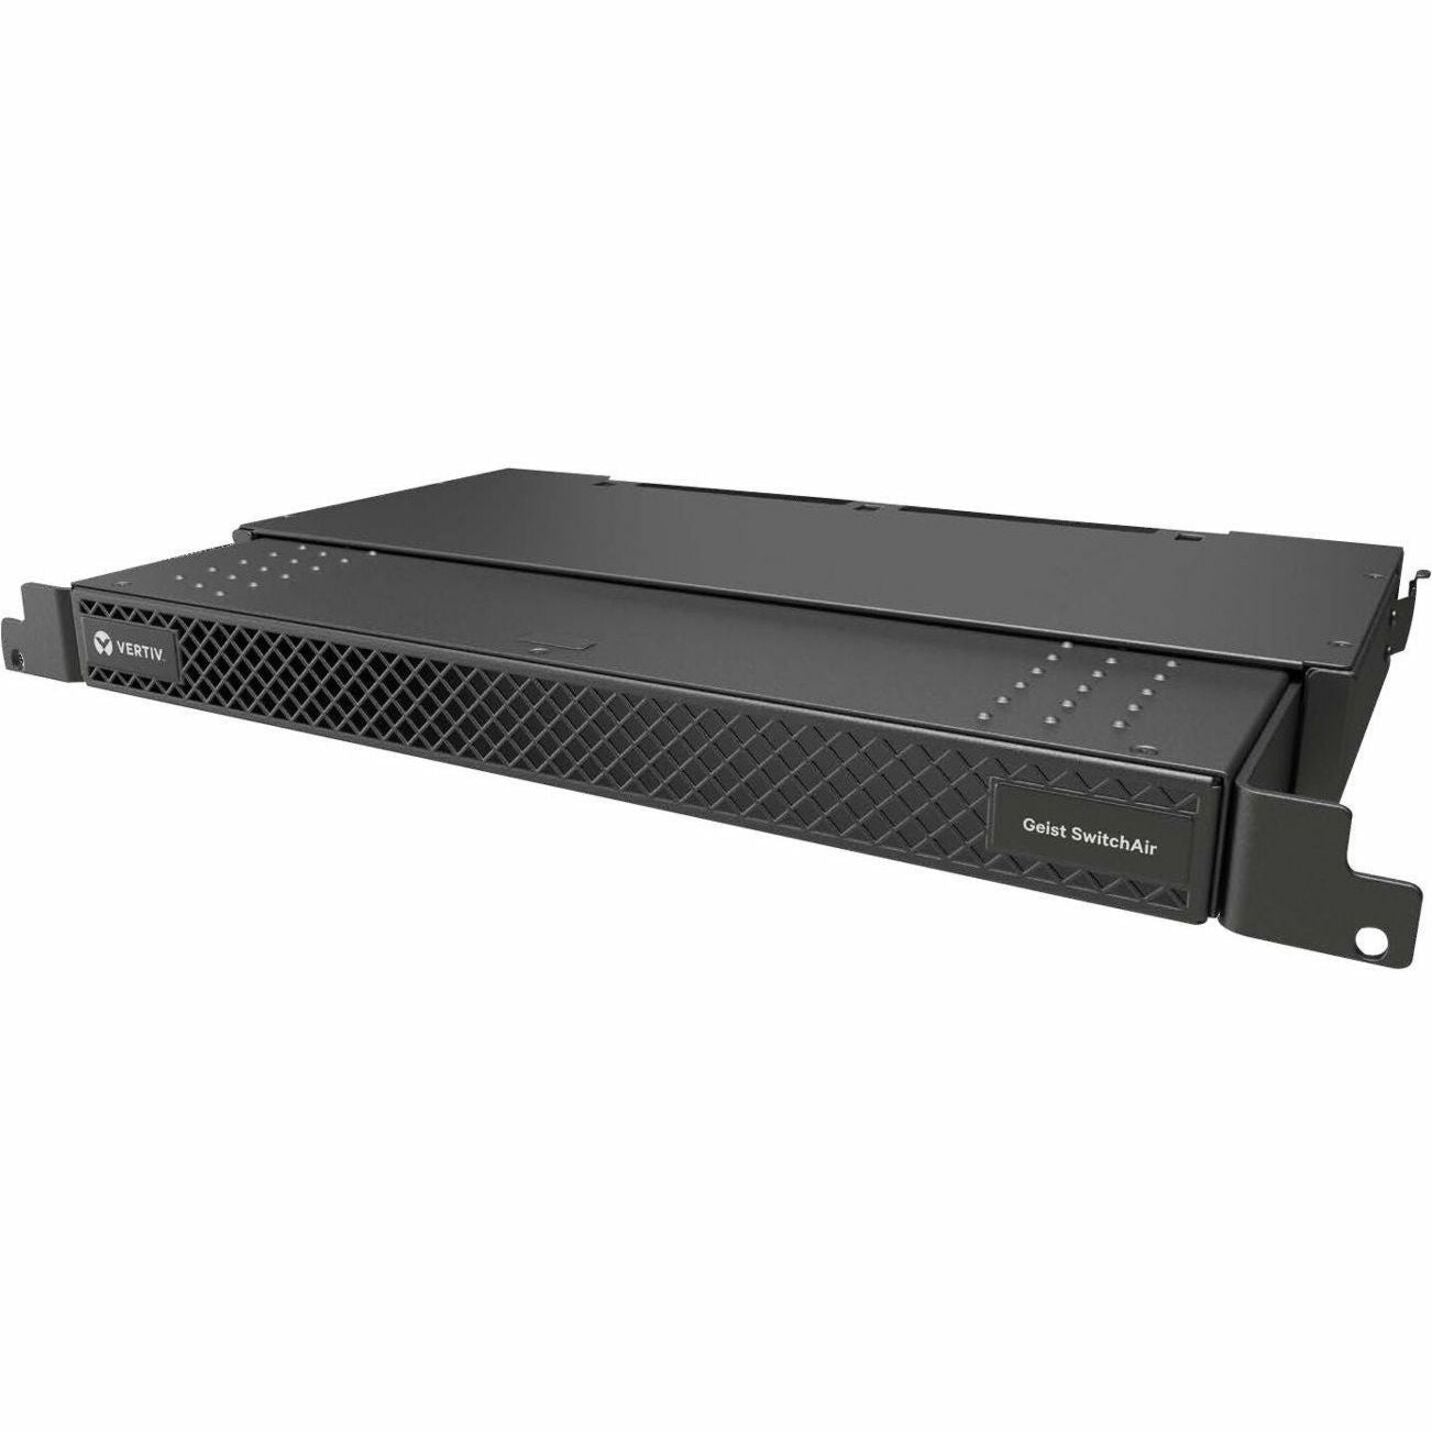 Geist SA1-01002 SwitchAir-Network Switch Cooling, Rack-mountable Airflow Cooling System